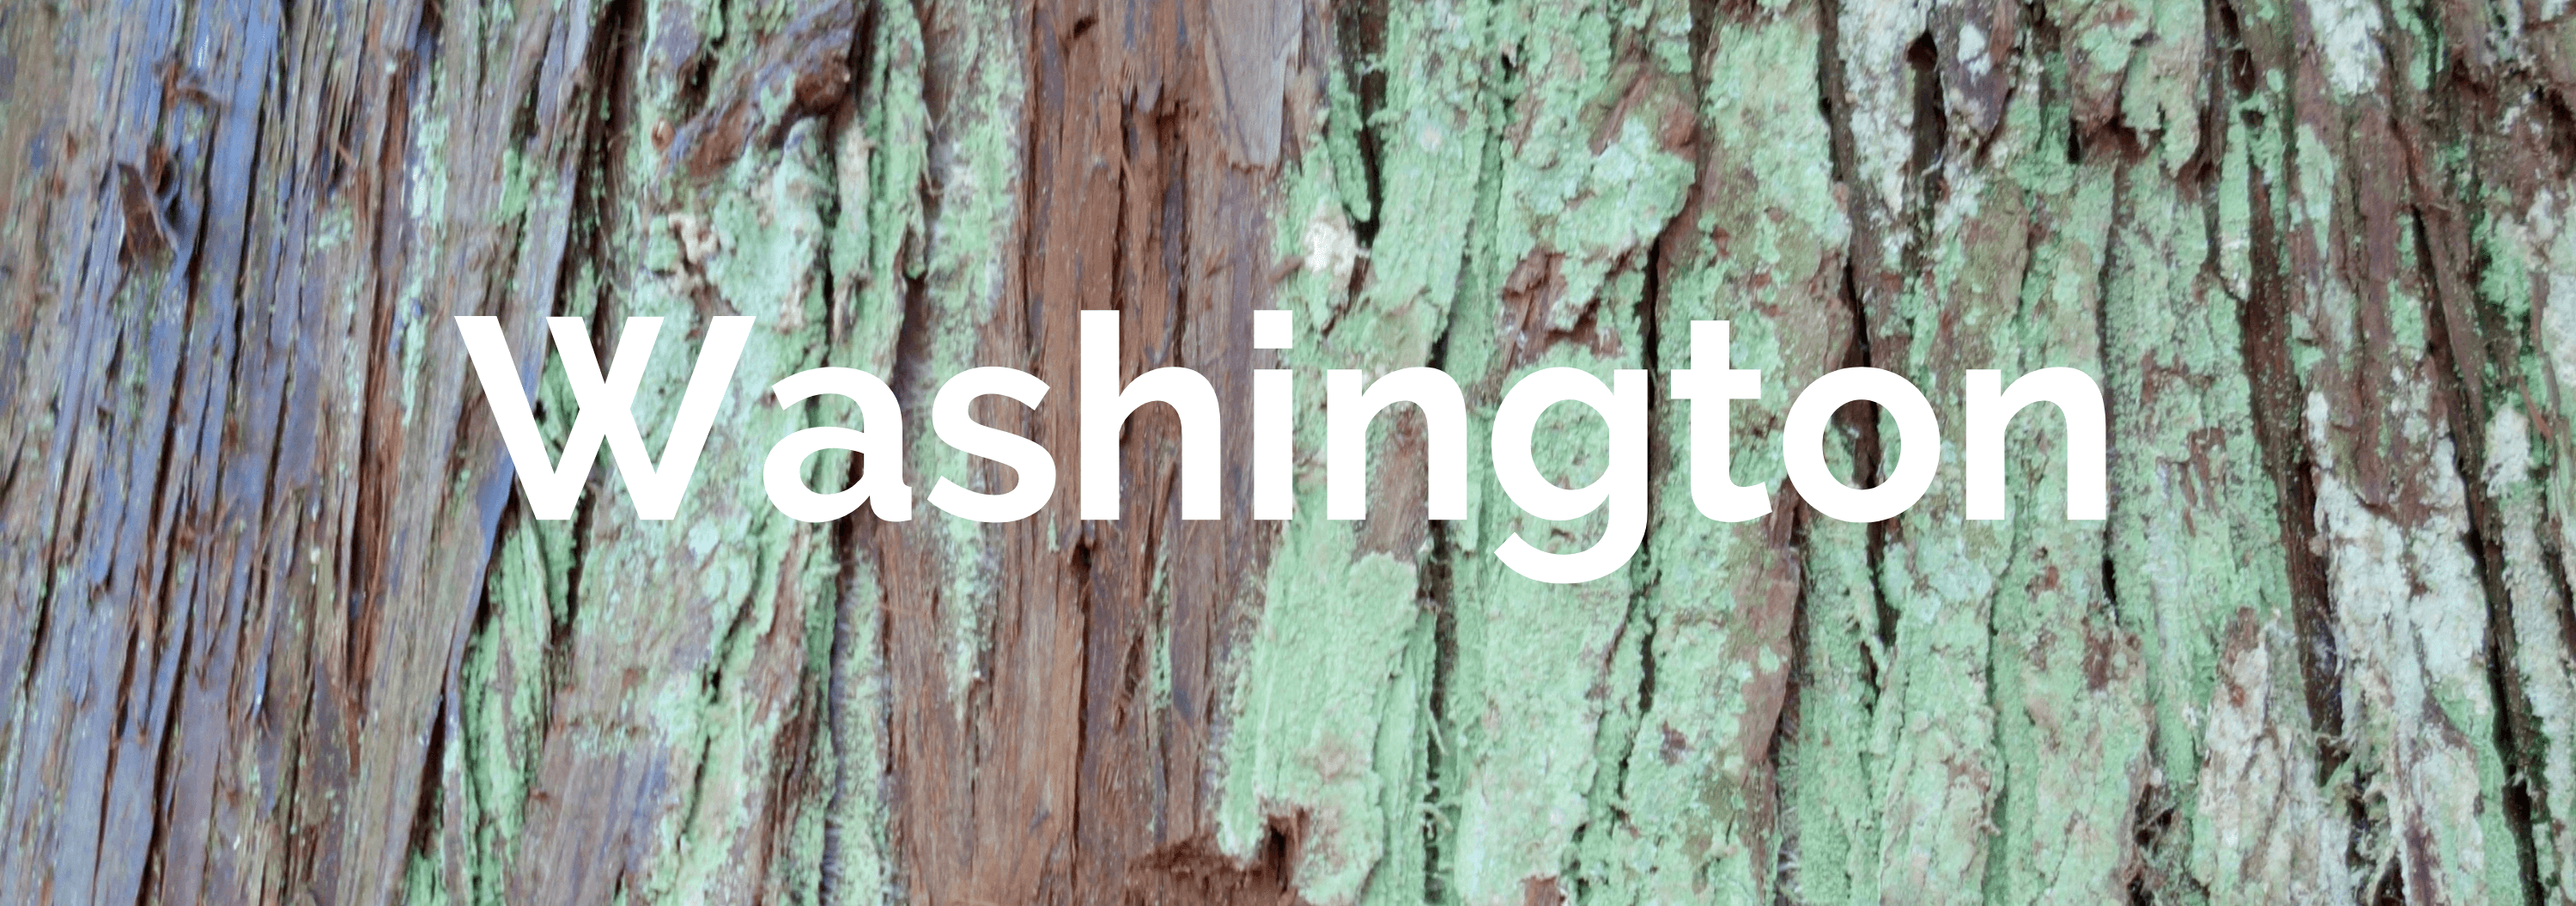 Tile of Cedar Bark that is brown and a moldy green color with the word Washington in White.